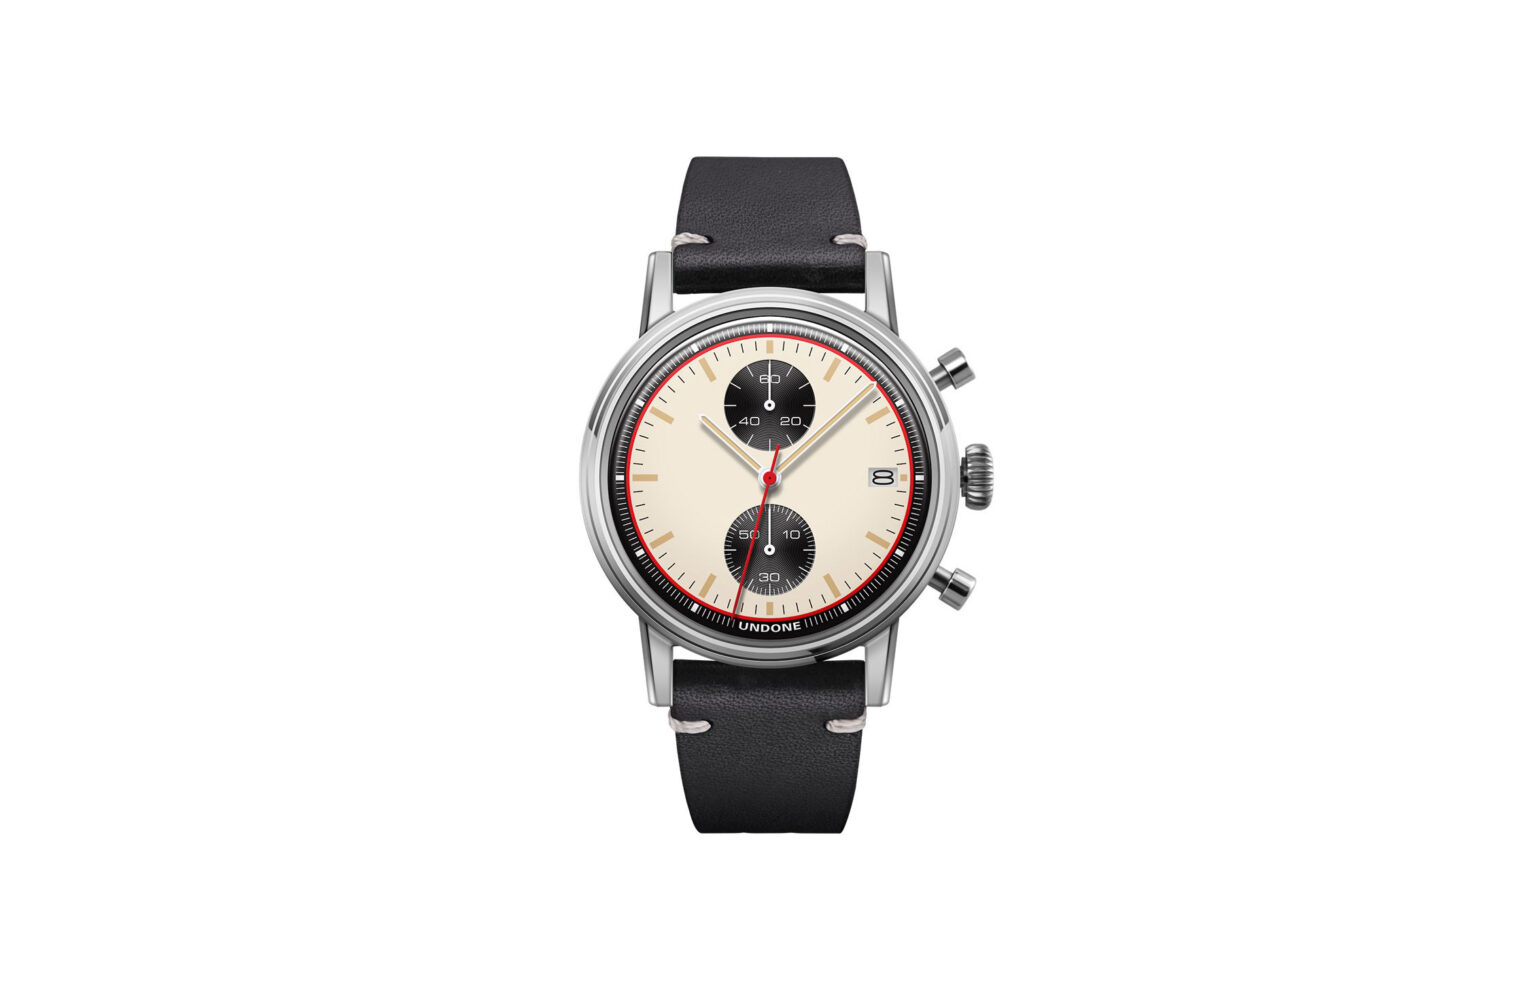 The Undone Newman Chronograph - An Unusually Affordable Daily-Wearable